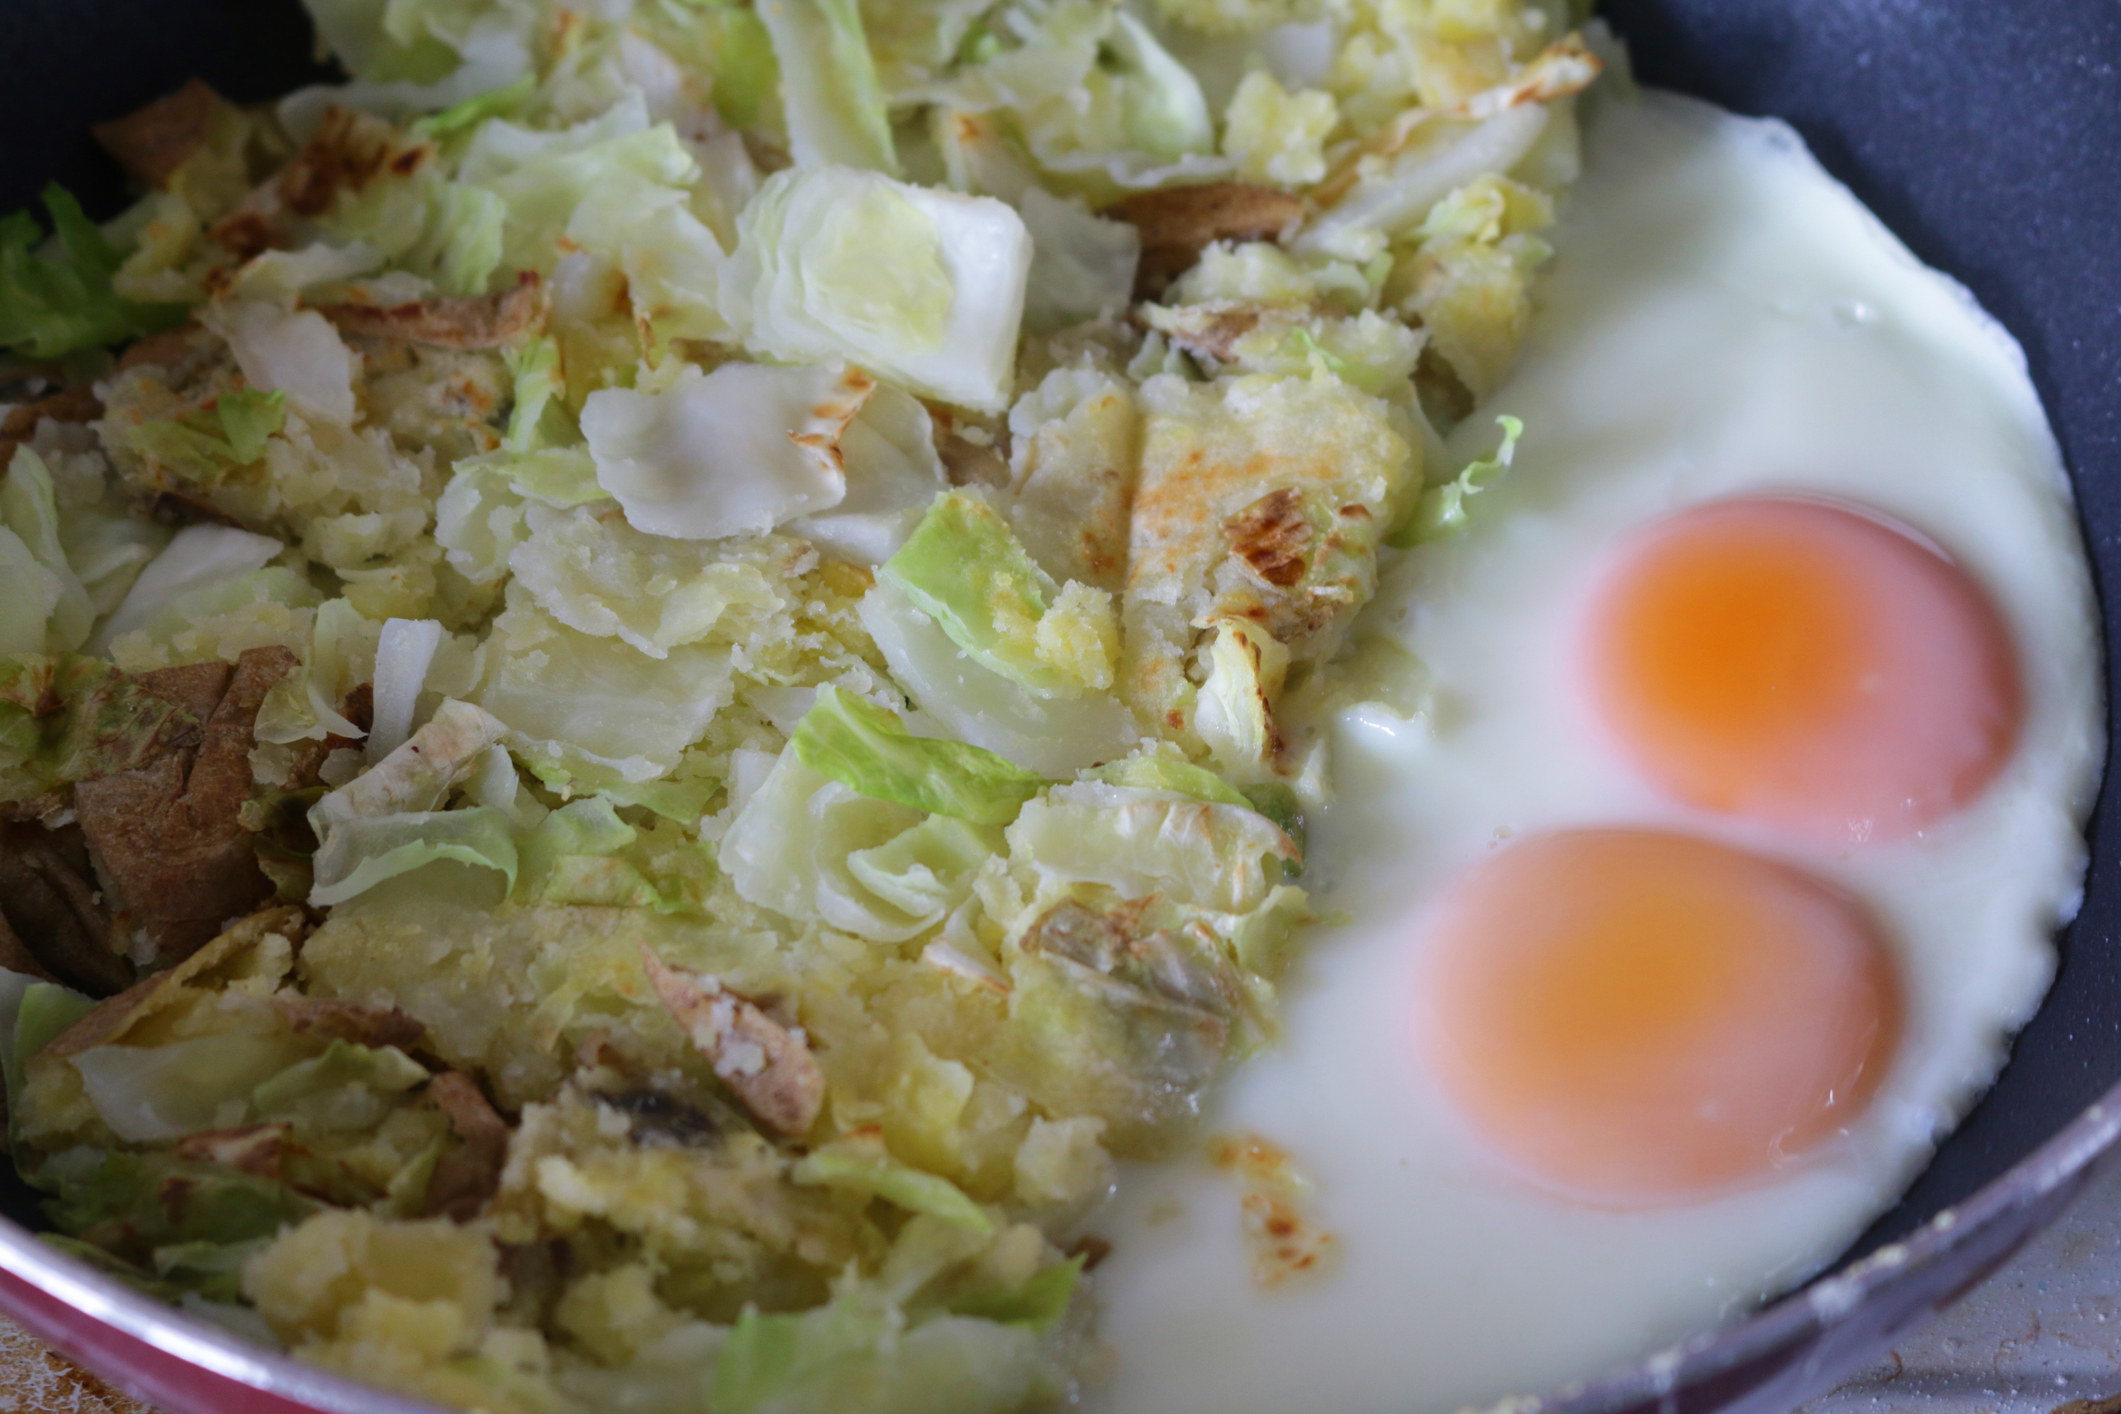 Fried potatoes, cabbage, and eggs.